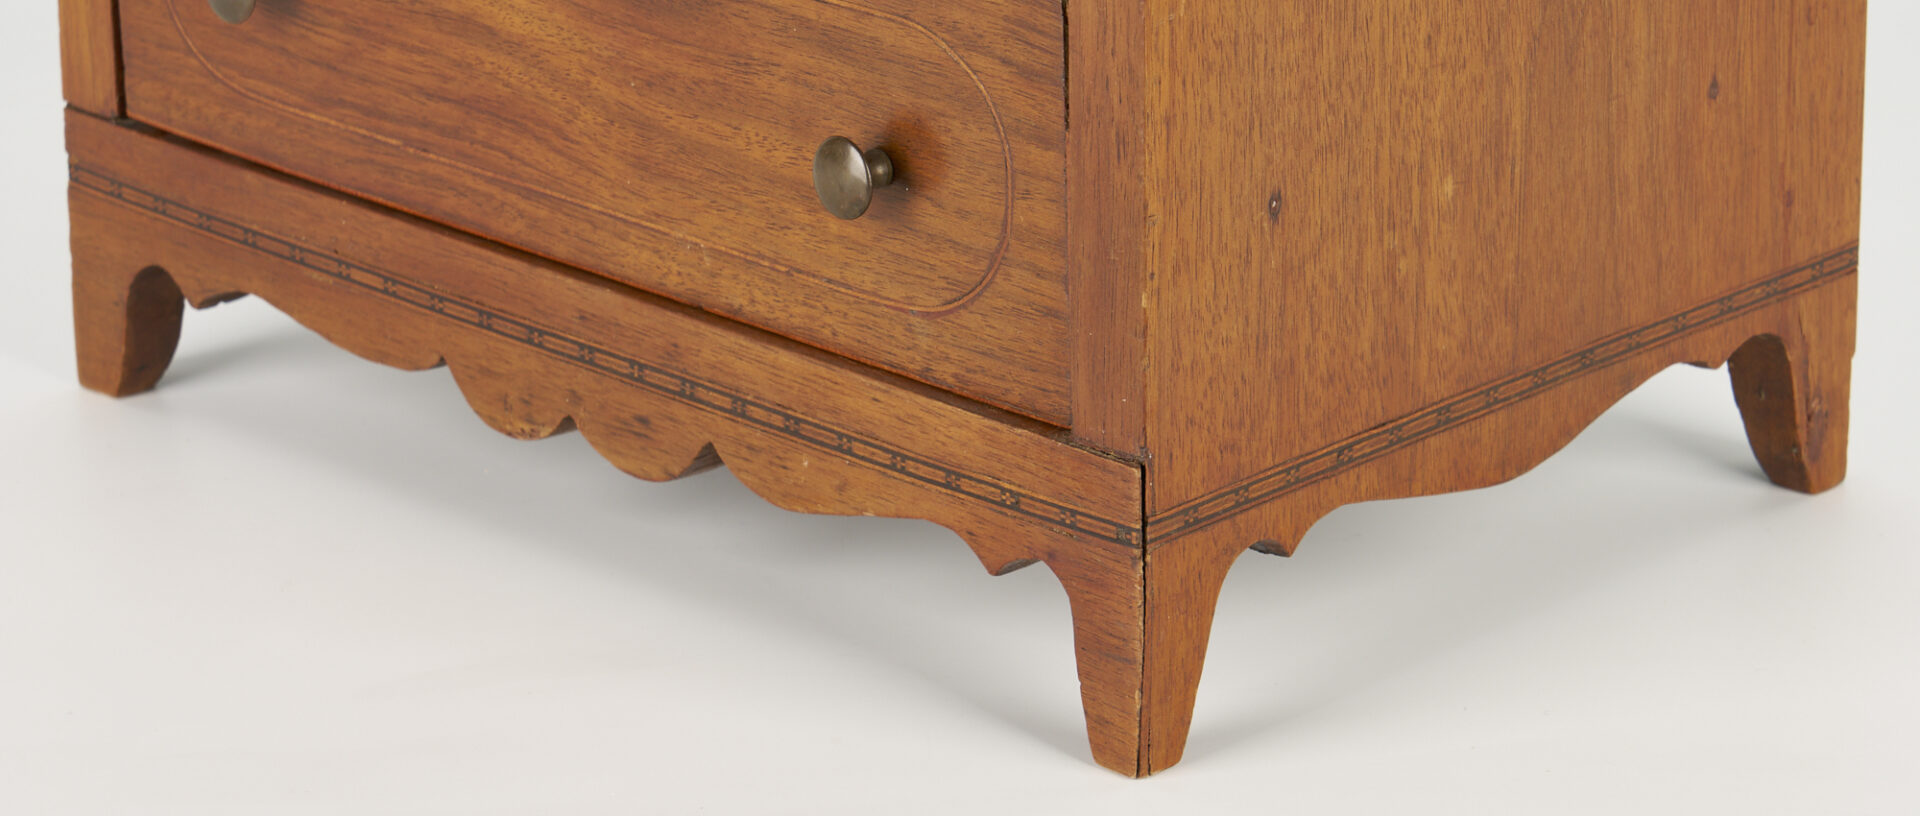 Lot 759: Miniature Inlaid Federal Style Chest of Drawers, 20th century